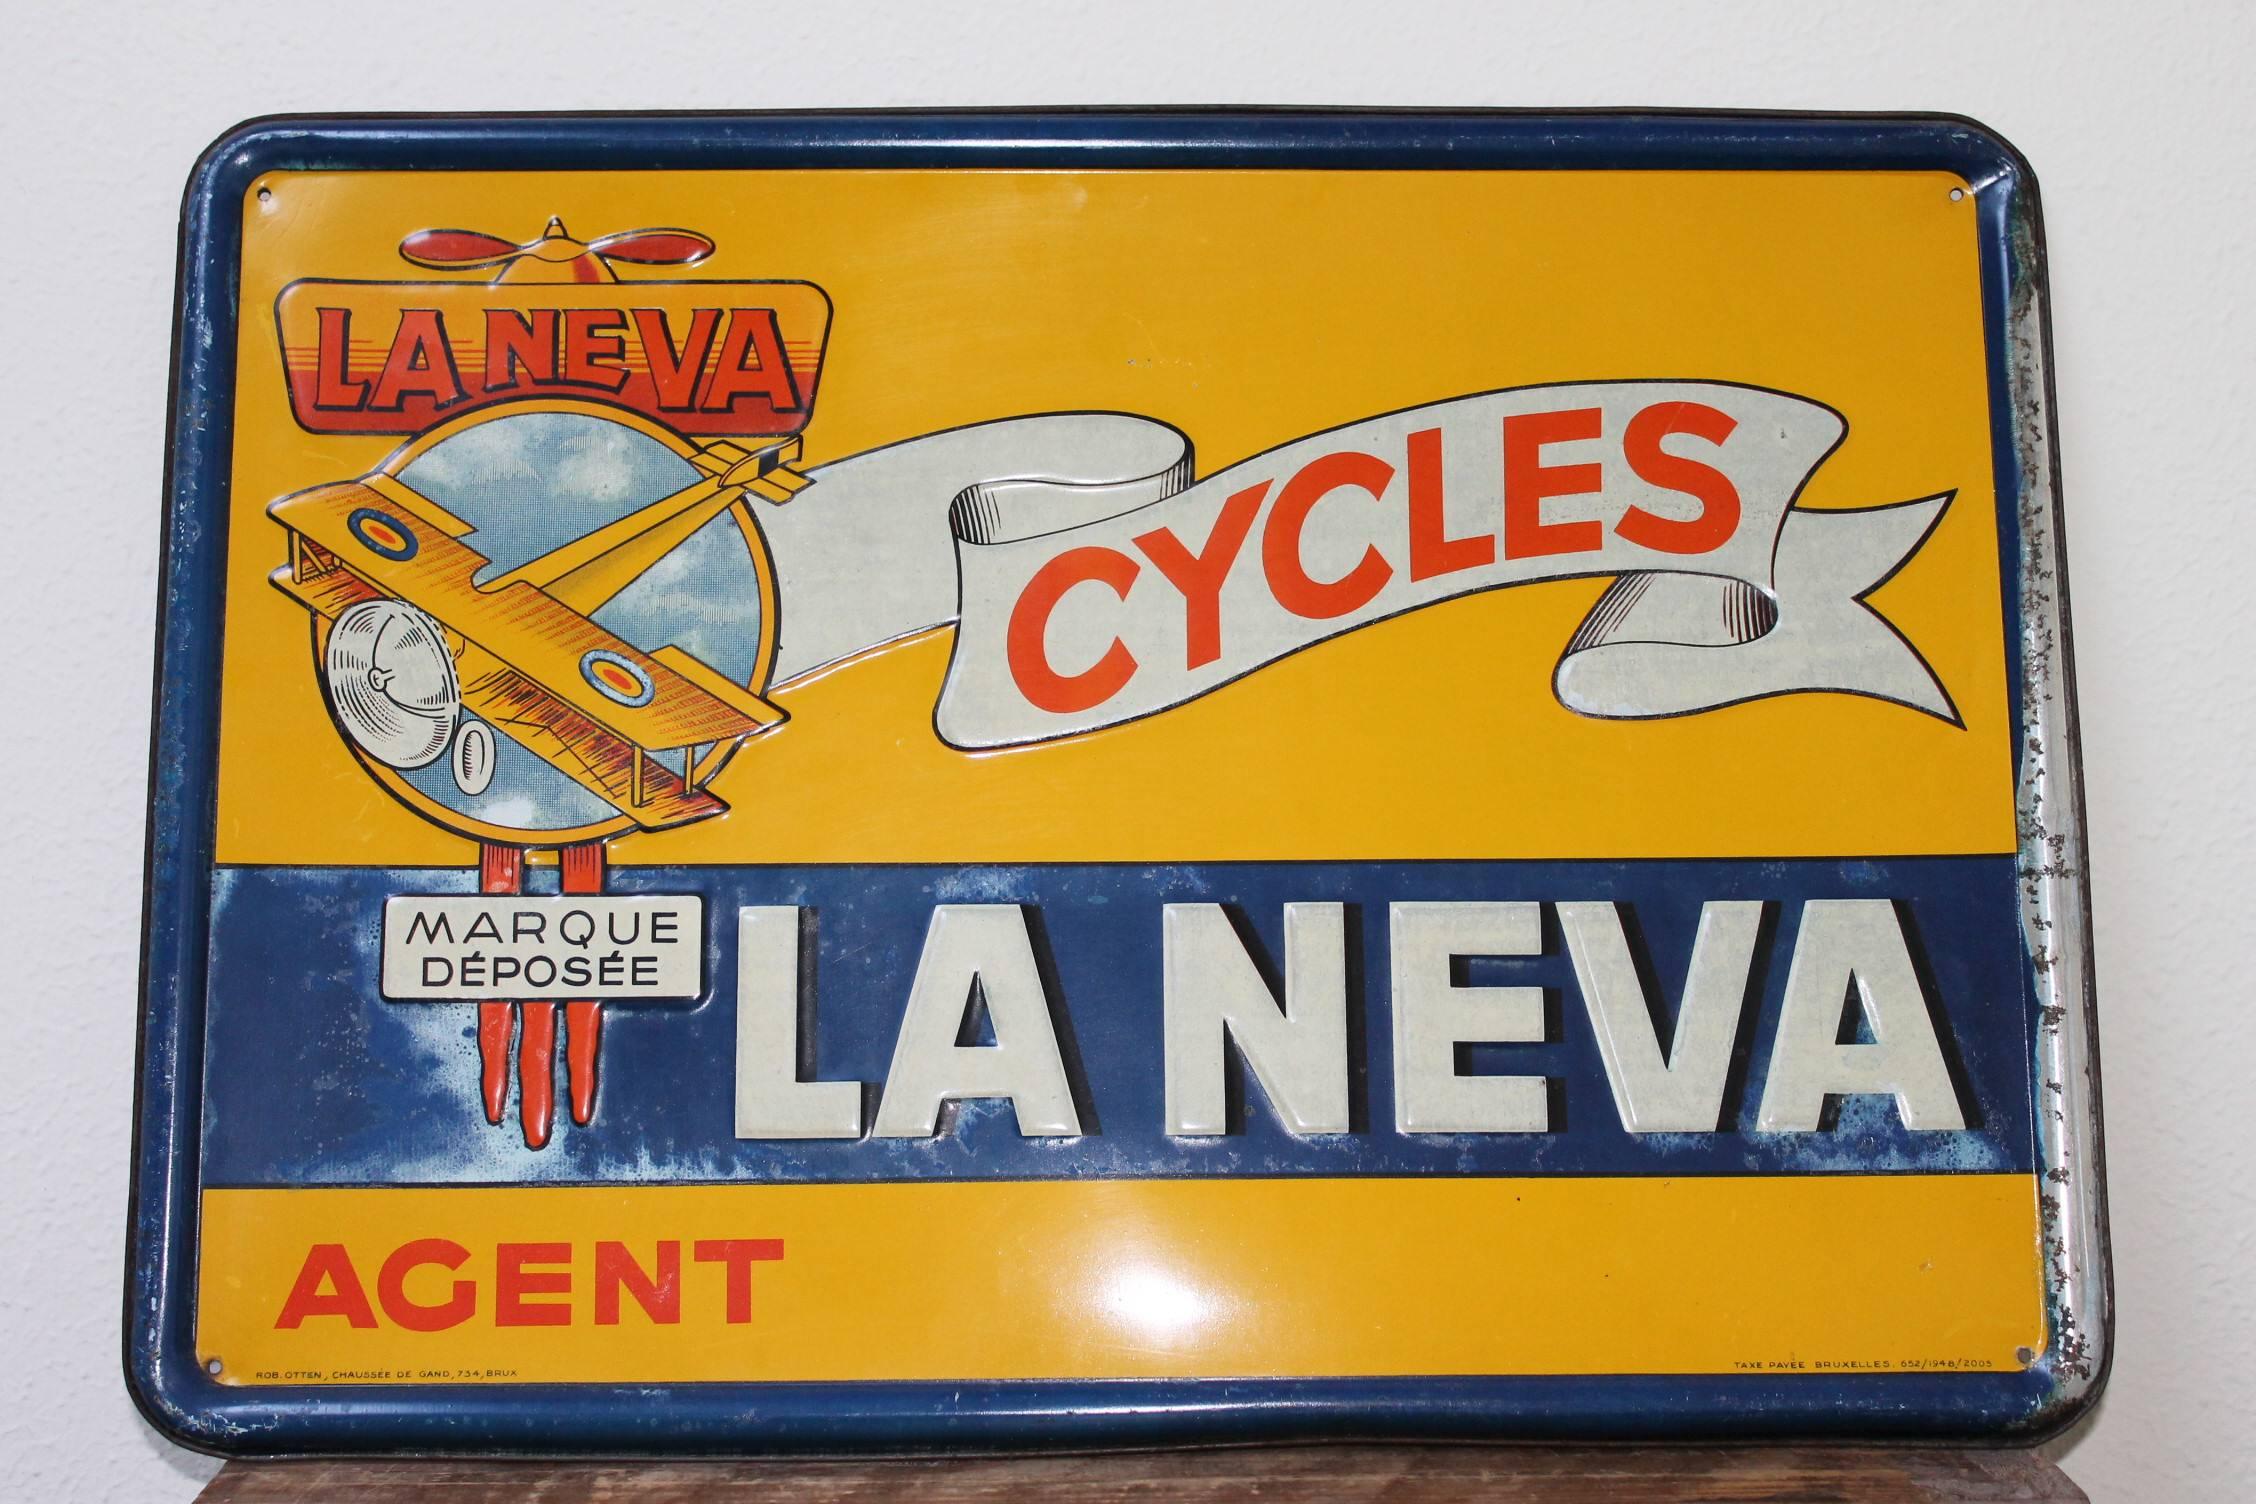 Mid-Century Modern 1948 Tin Publicity Sign for La Neva Cycles